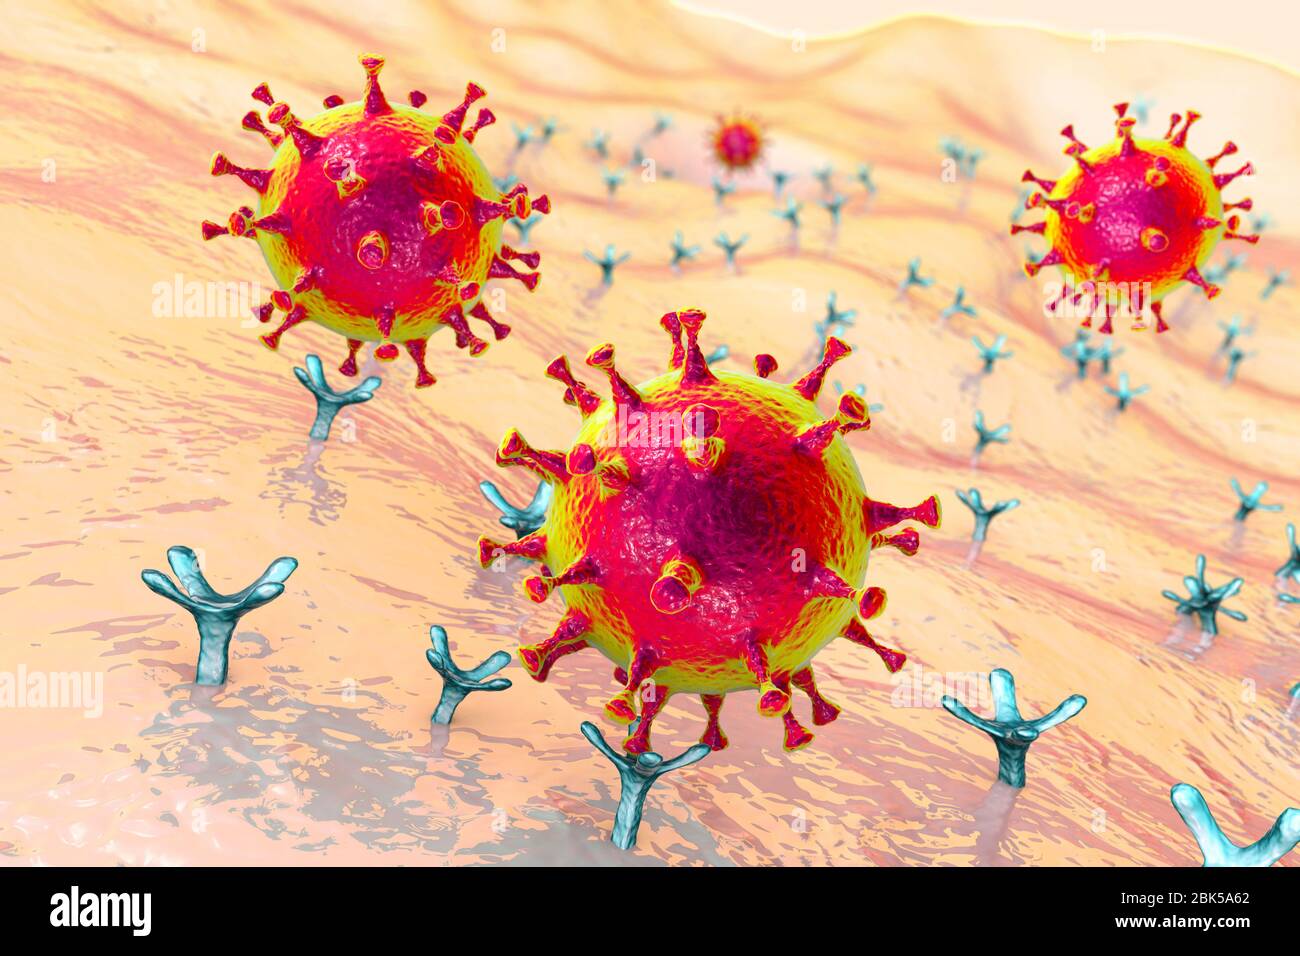 Covid-19 coronavirus binding to human cell, conceptual computer illustration. SARS-CoV-2 coronavirus (previously 2019-nCoV) binding to an ACE2 receptor on a human cell (not to scale). SARS-CoV-2 causes the respiratory infection Covid-19, which can lead to fatal pneumonia. ACE2 (angiotensin-converting enzyme 2) is a membrane-bound aminopeptidase, the key host receptor for the spike glycoprotein of SARS-CoV-2 which serves as initial step in the development of coronavirus infection on a cellular level and a potential target for treatment strategy. Stock Photo